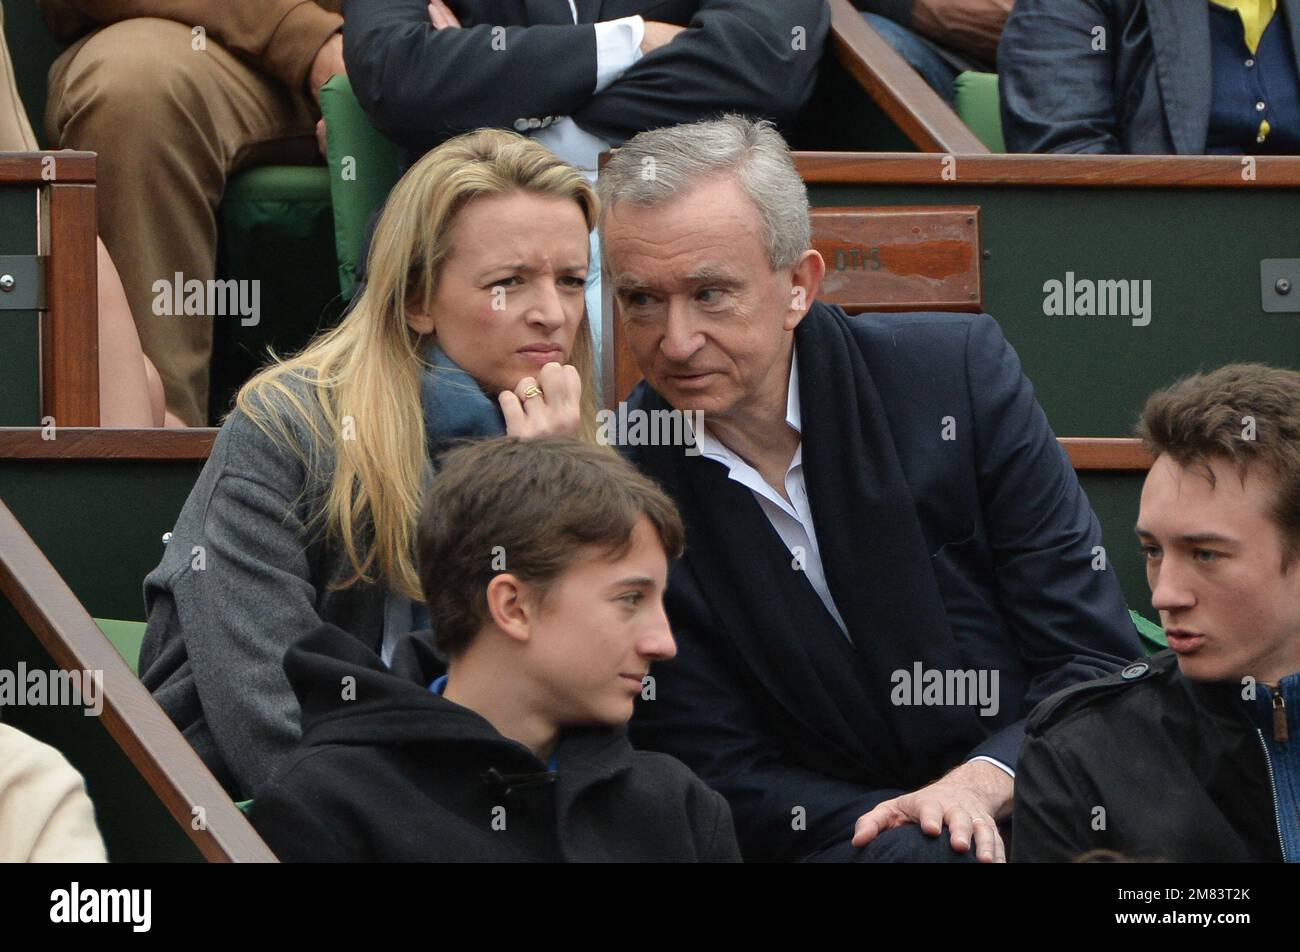 Billionaire Arnault Appoints Daughter Delphine for CEO at Dior and